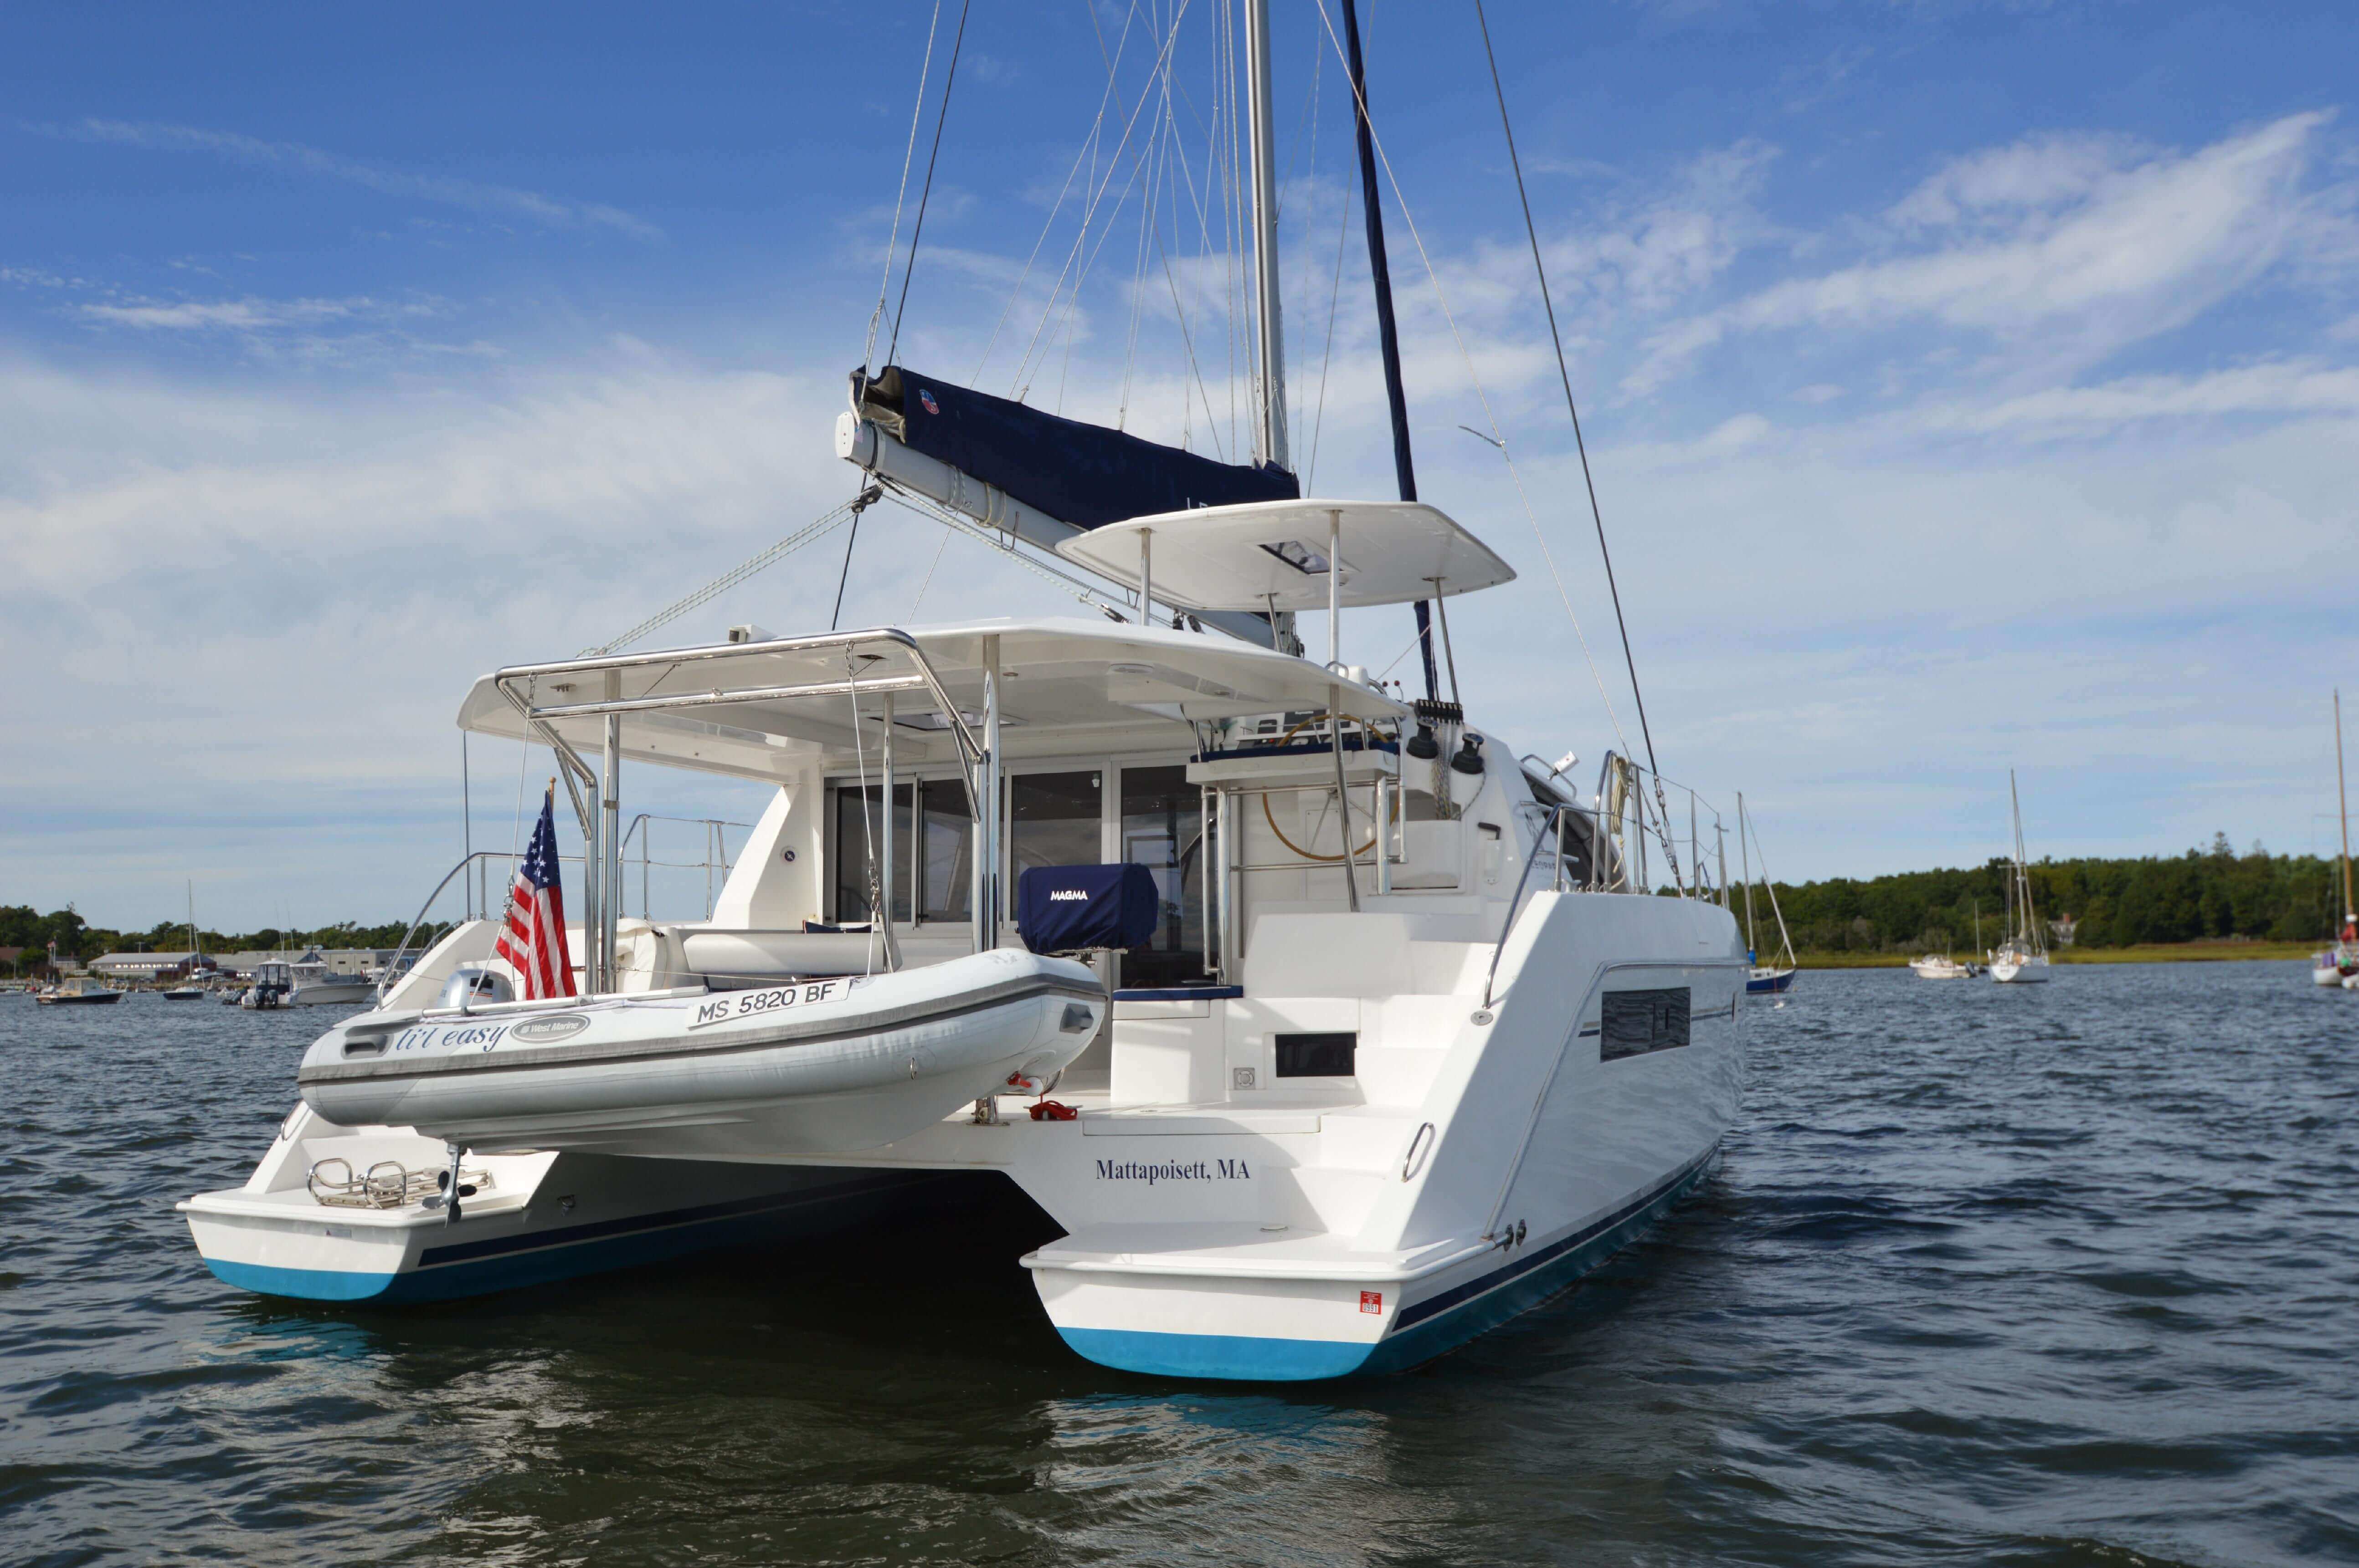 Used Sail Catamaran for Sale 2015 Leopard 40 Boat Highlights